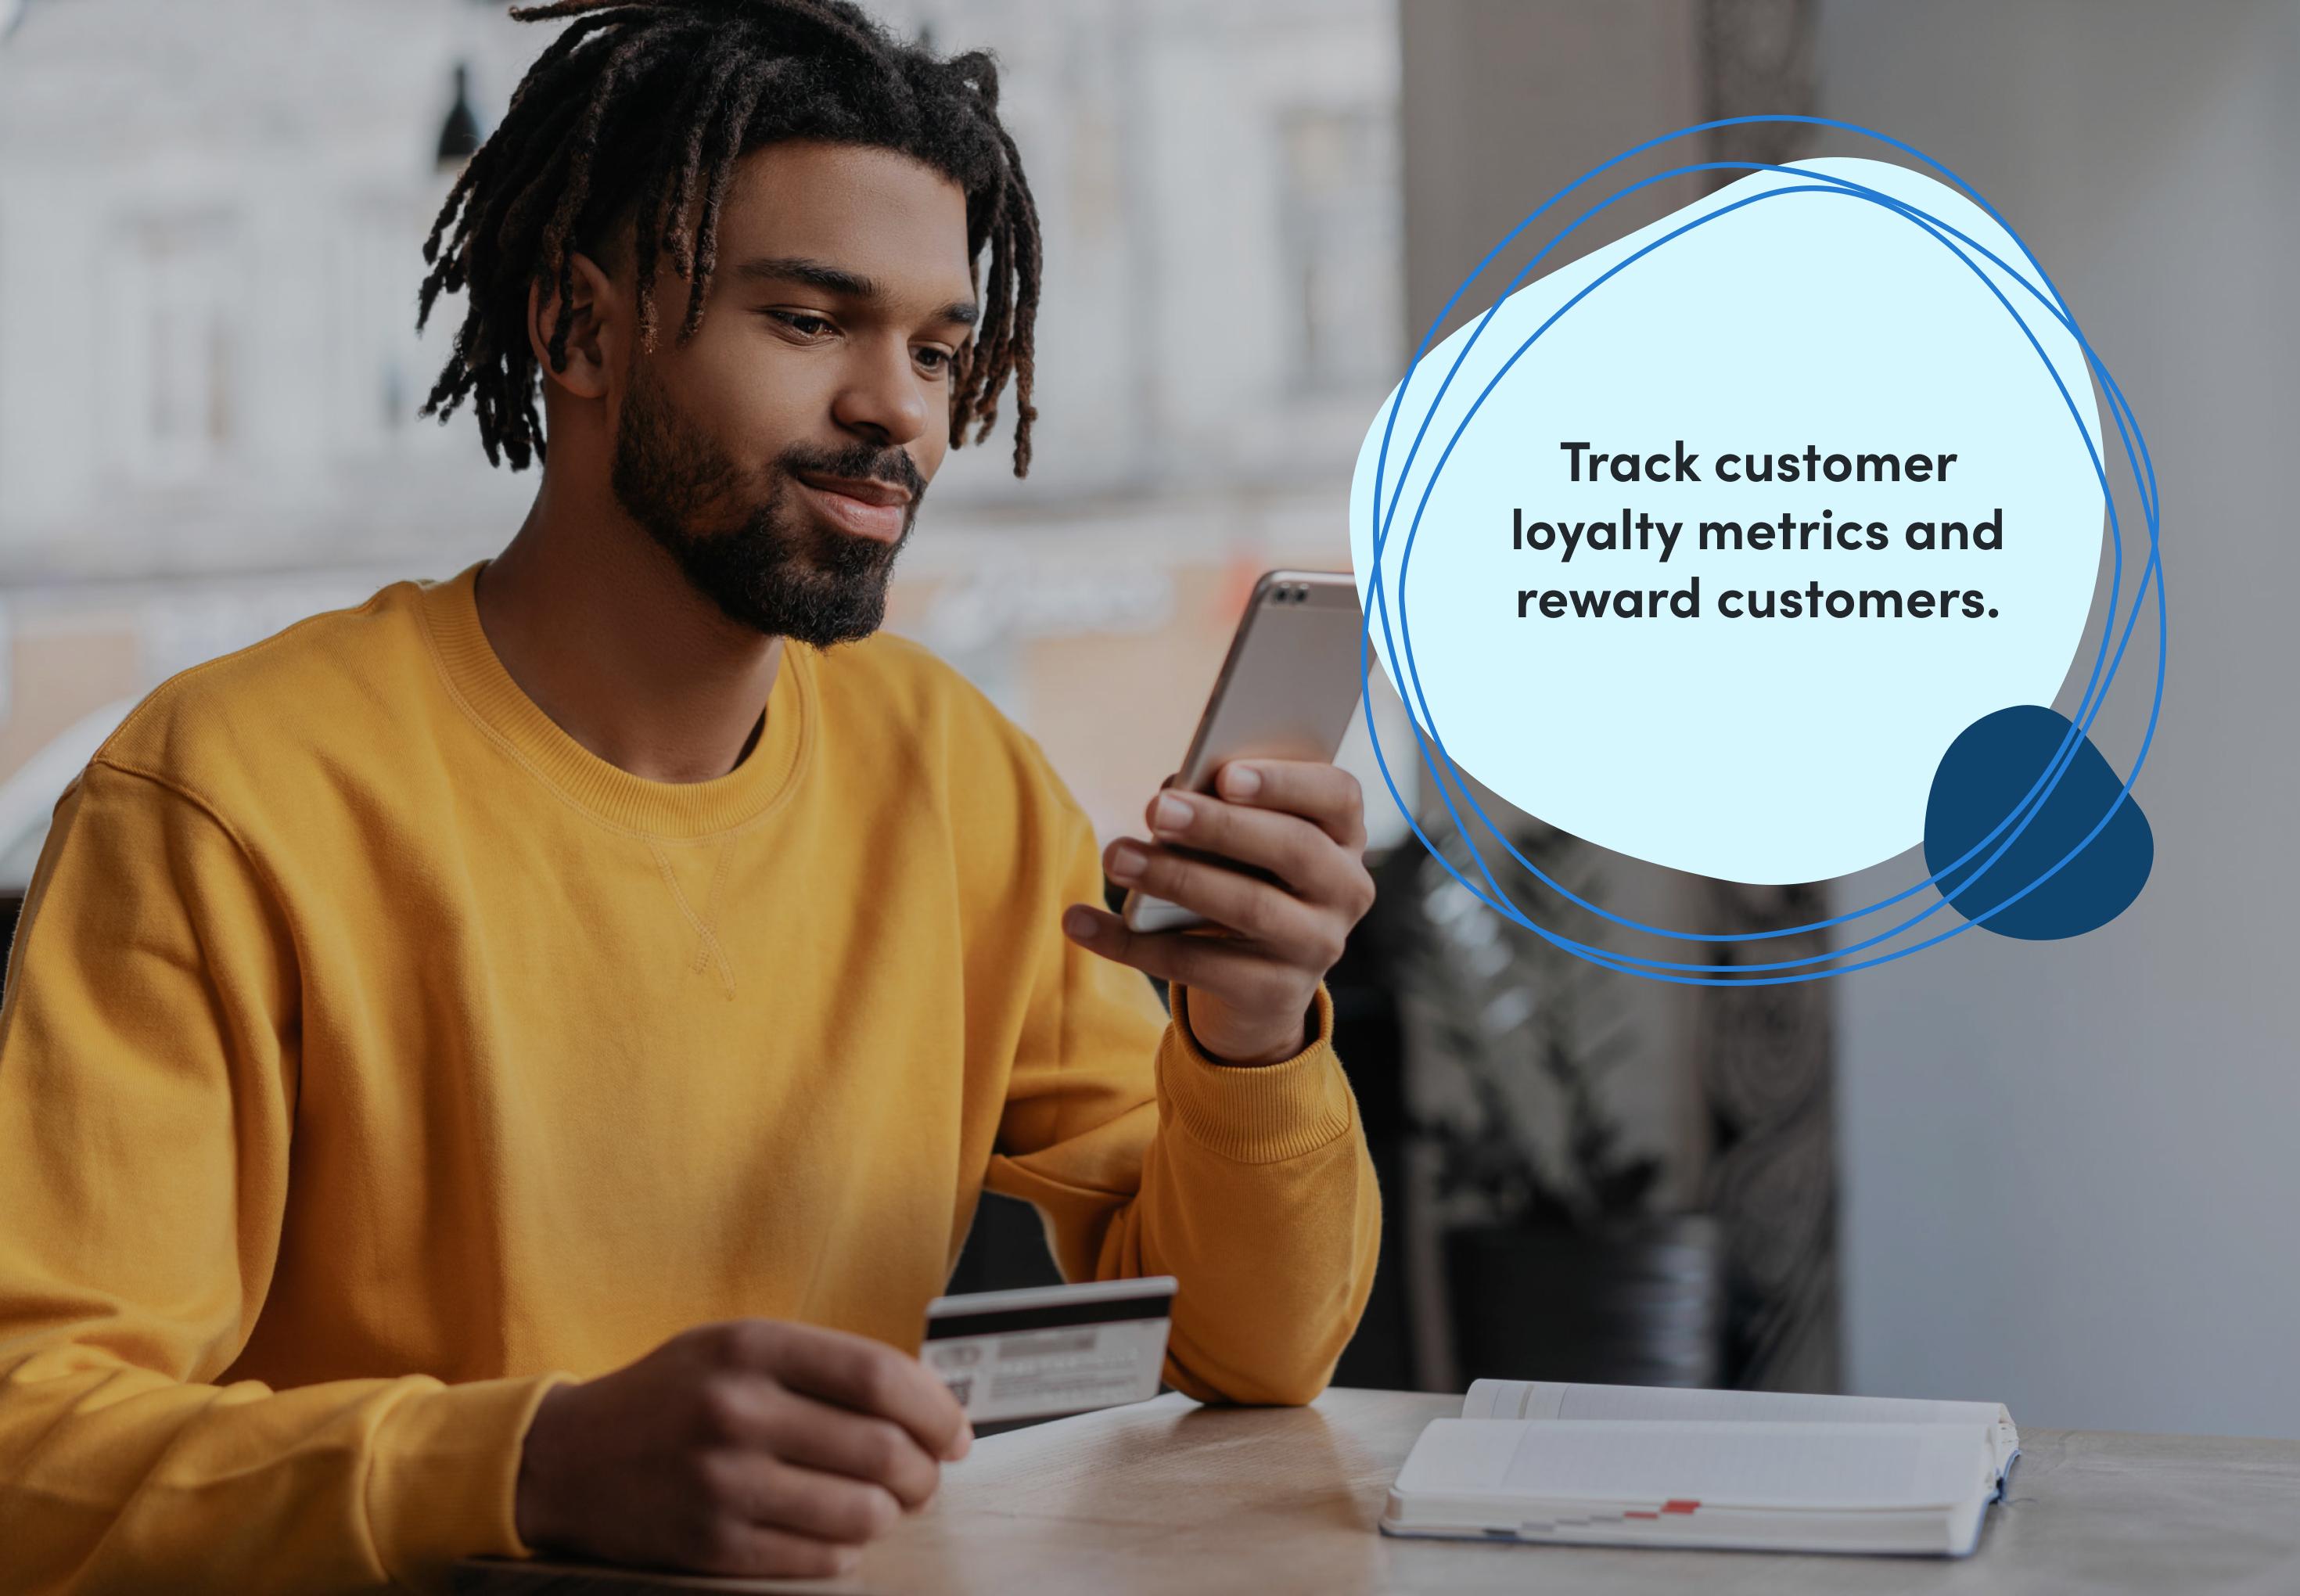 A man uses a mobile phone to pay for something with a text bubble overlaid reading “Track customer loyalty metrics and reward customers.“